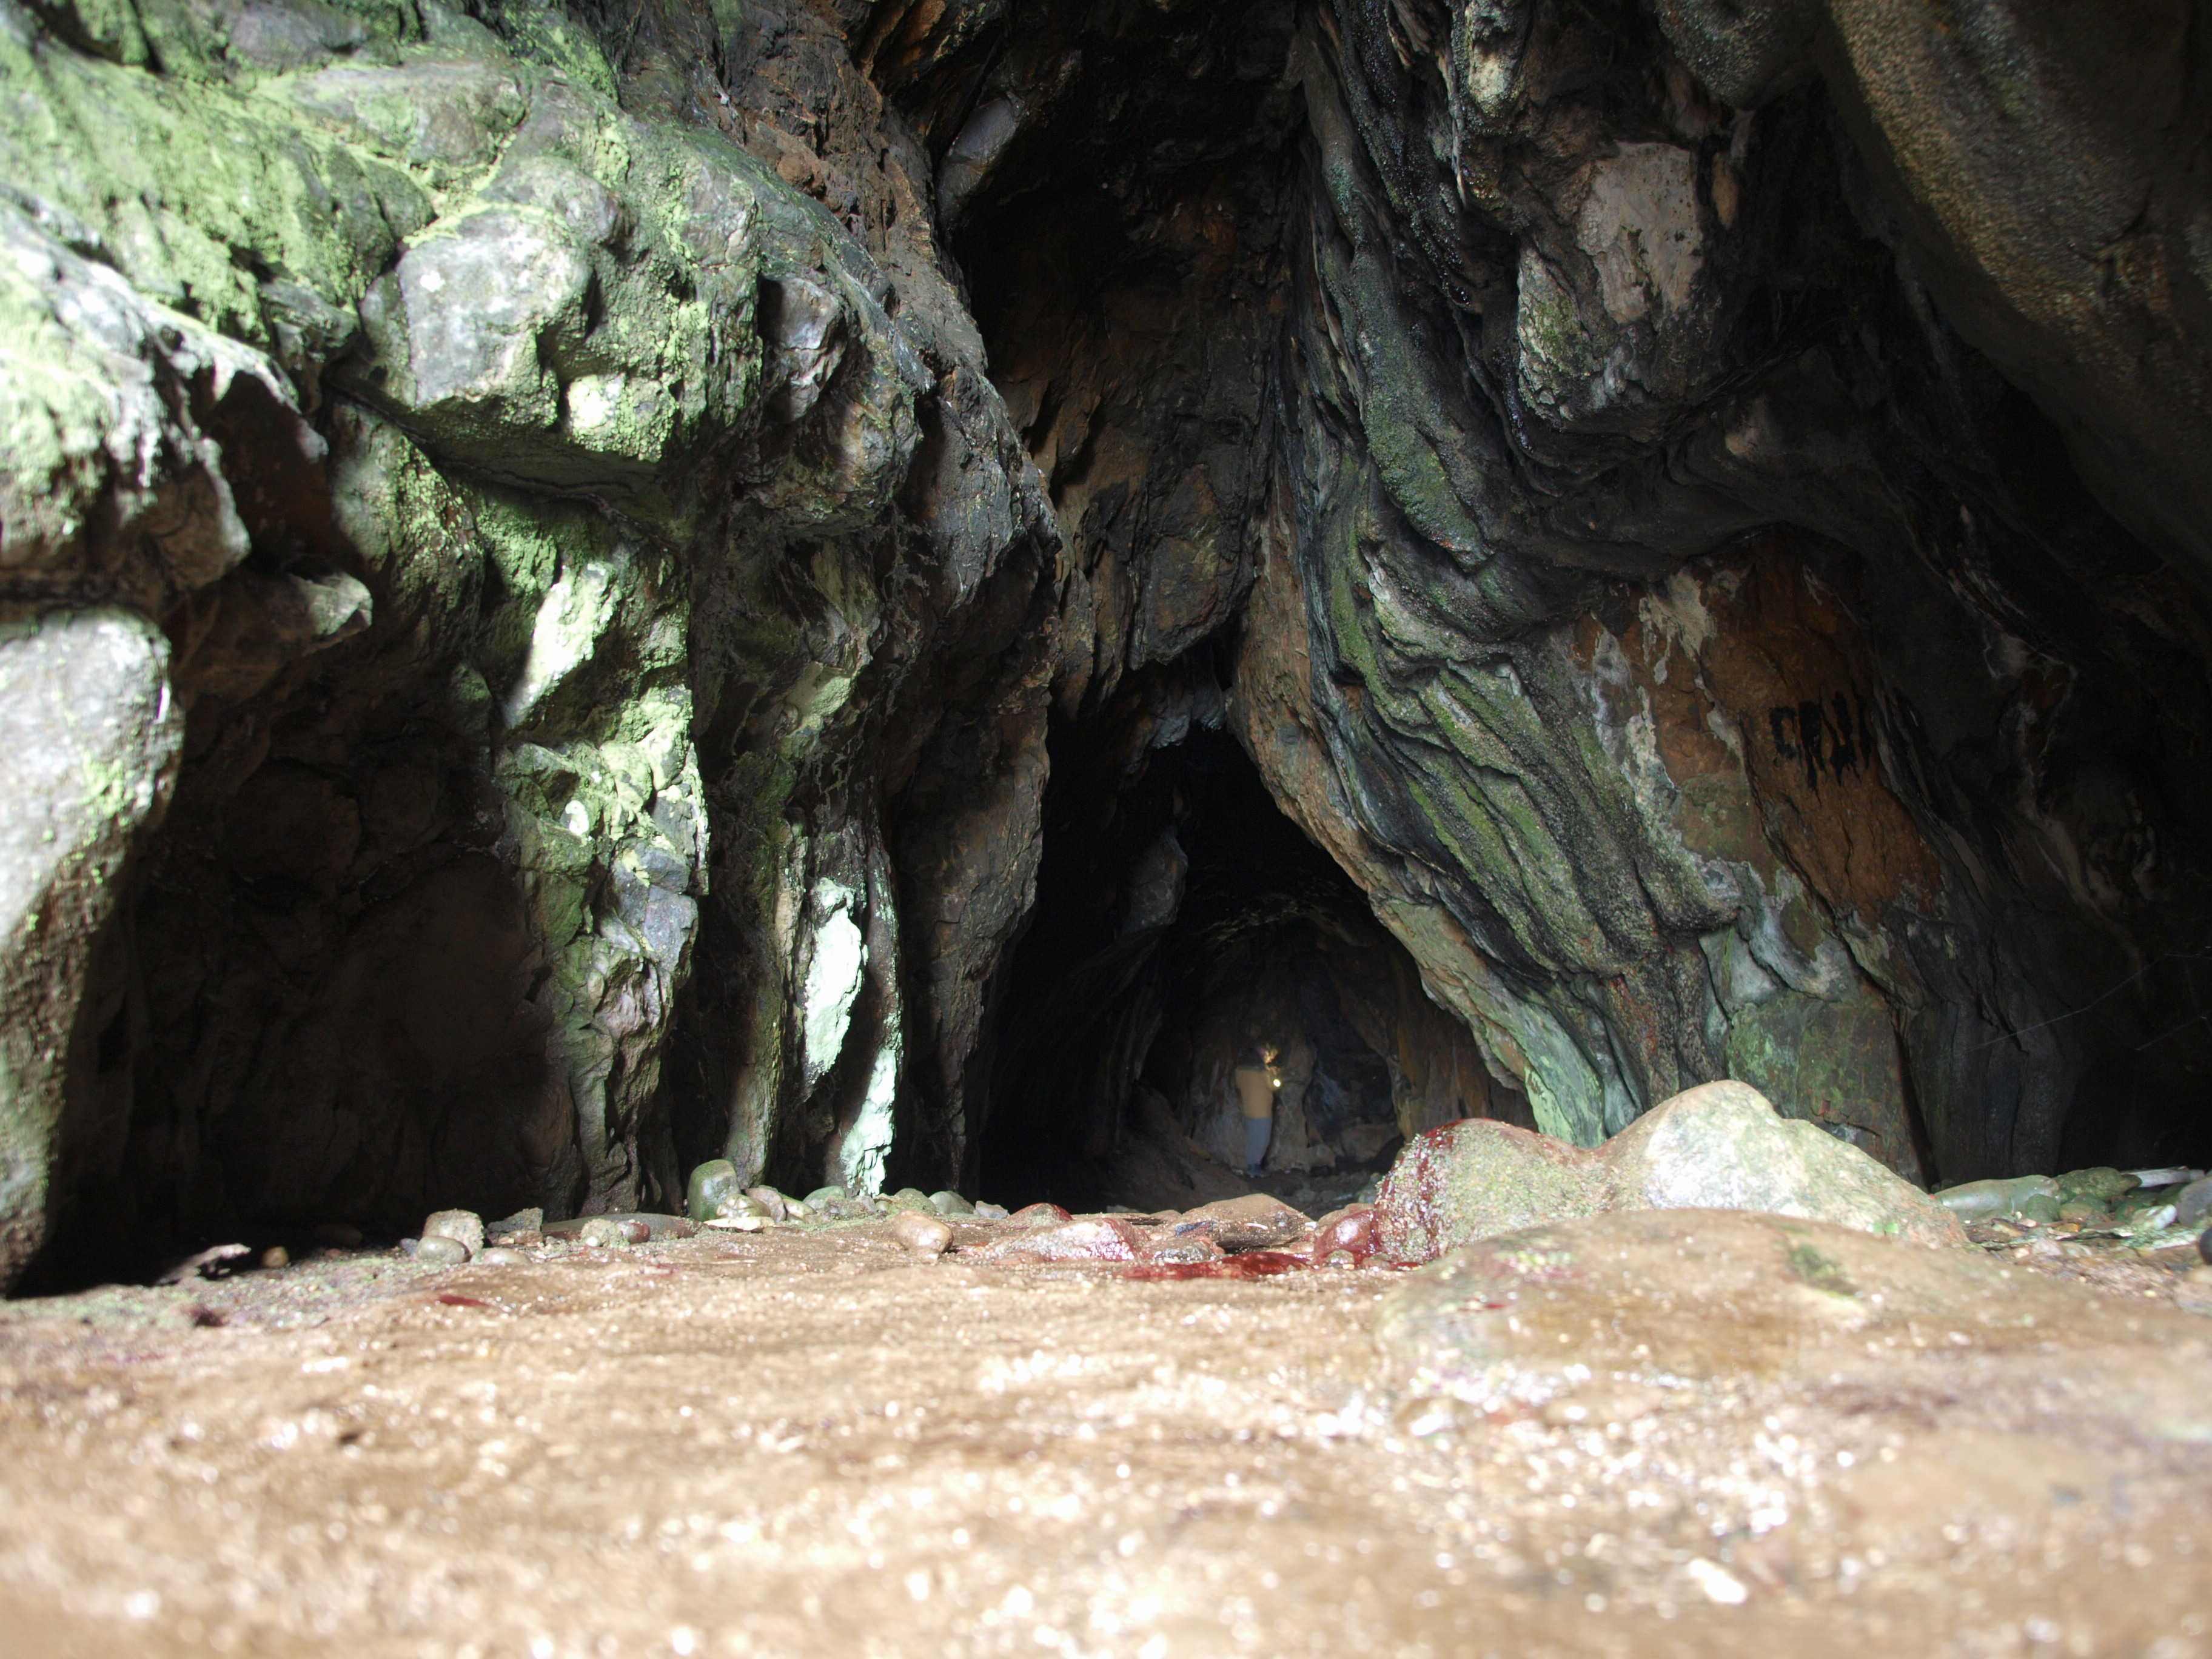 View of first and longest section of cave from entrance